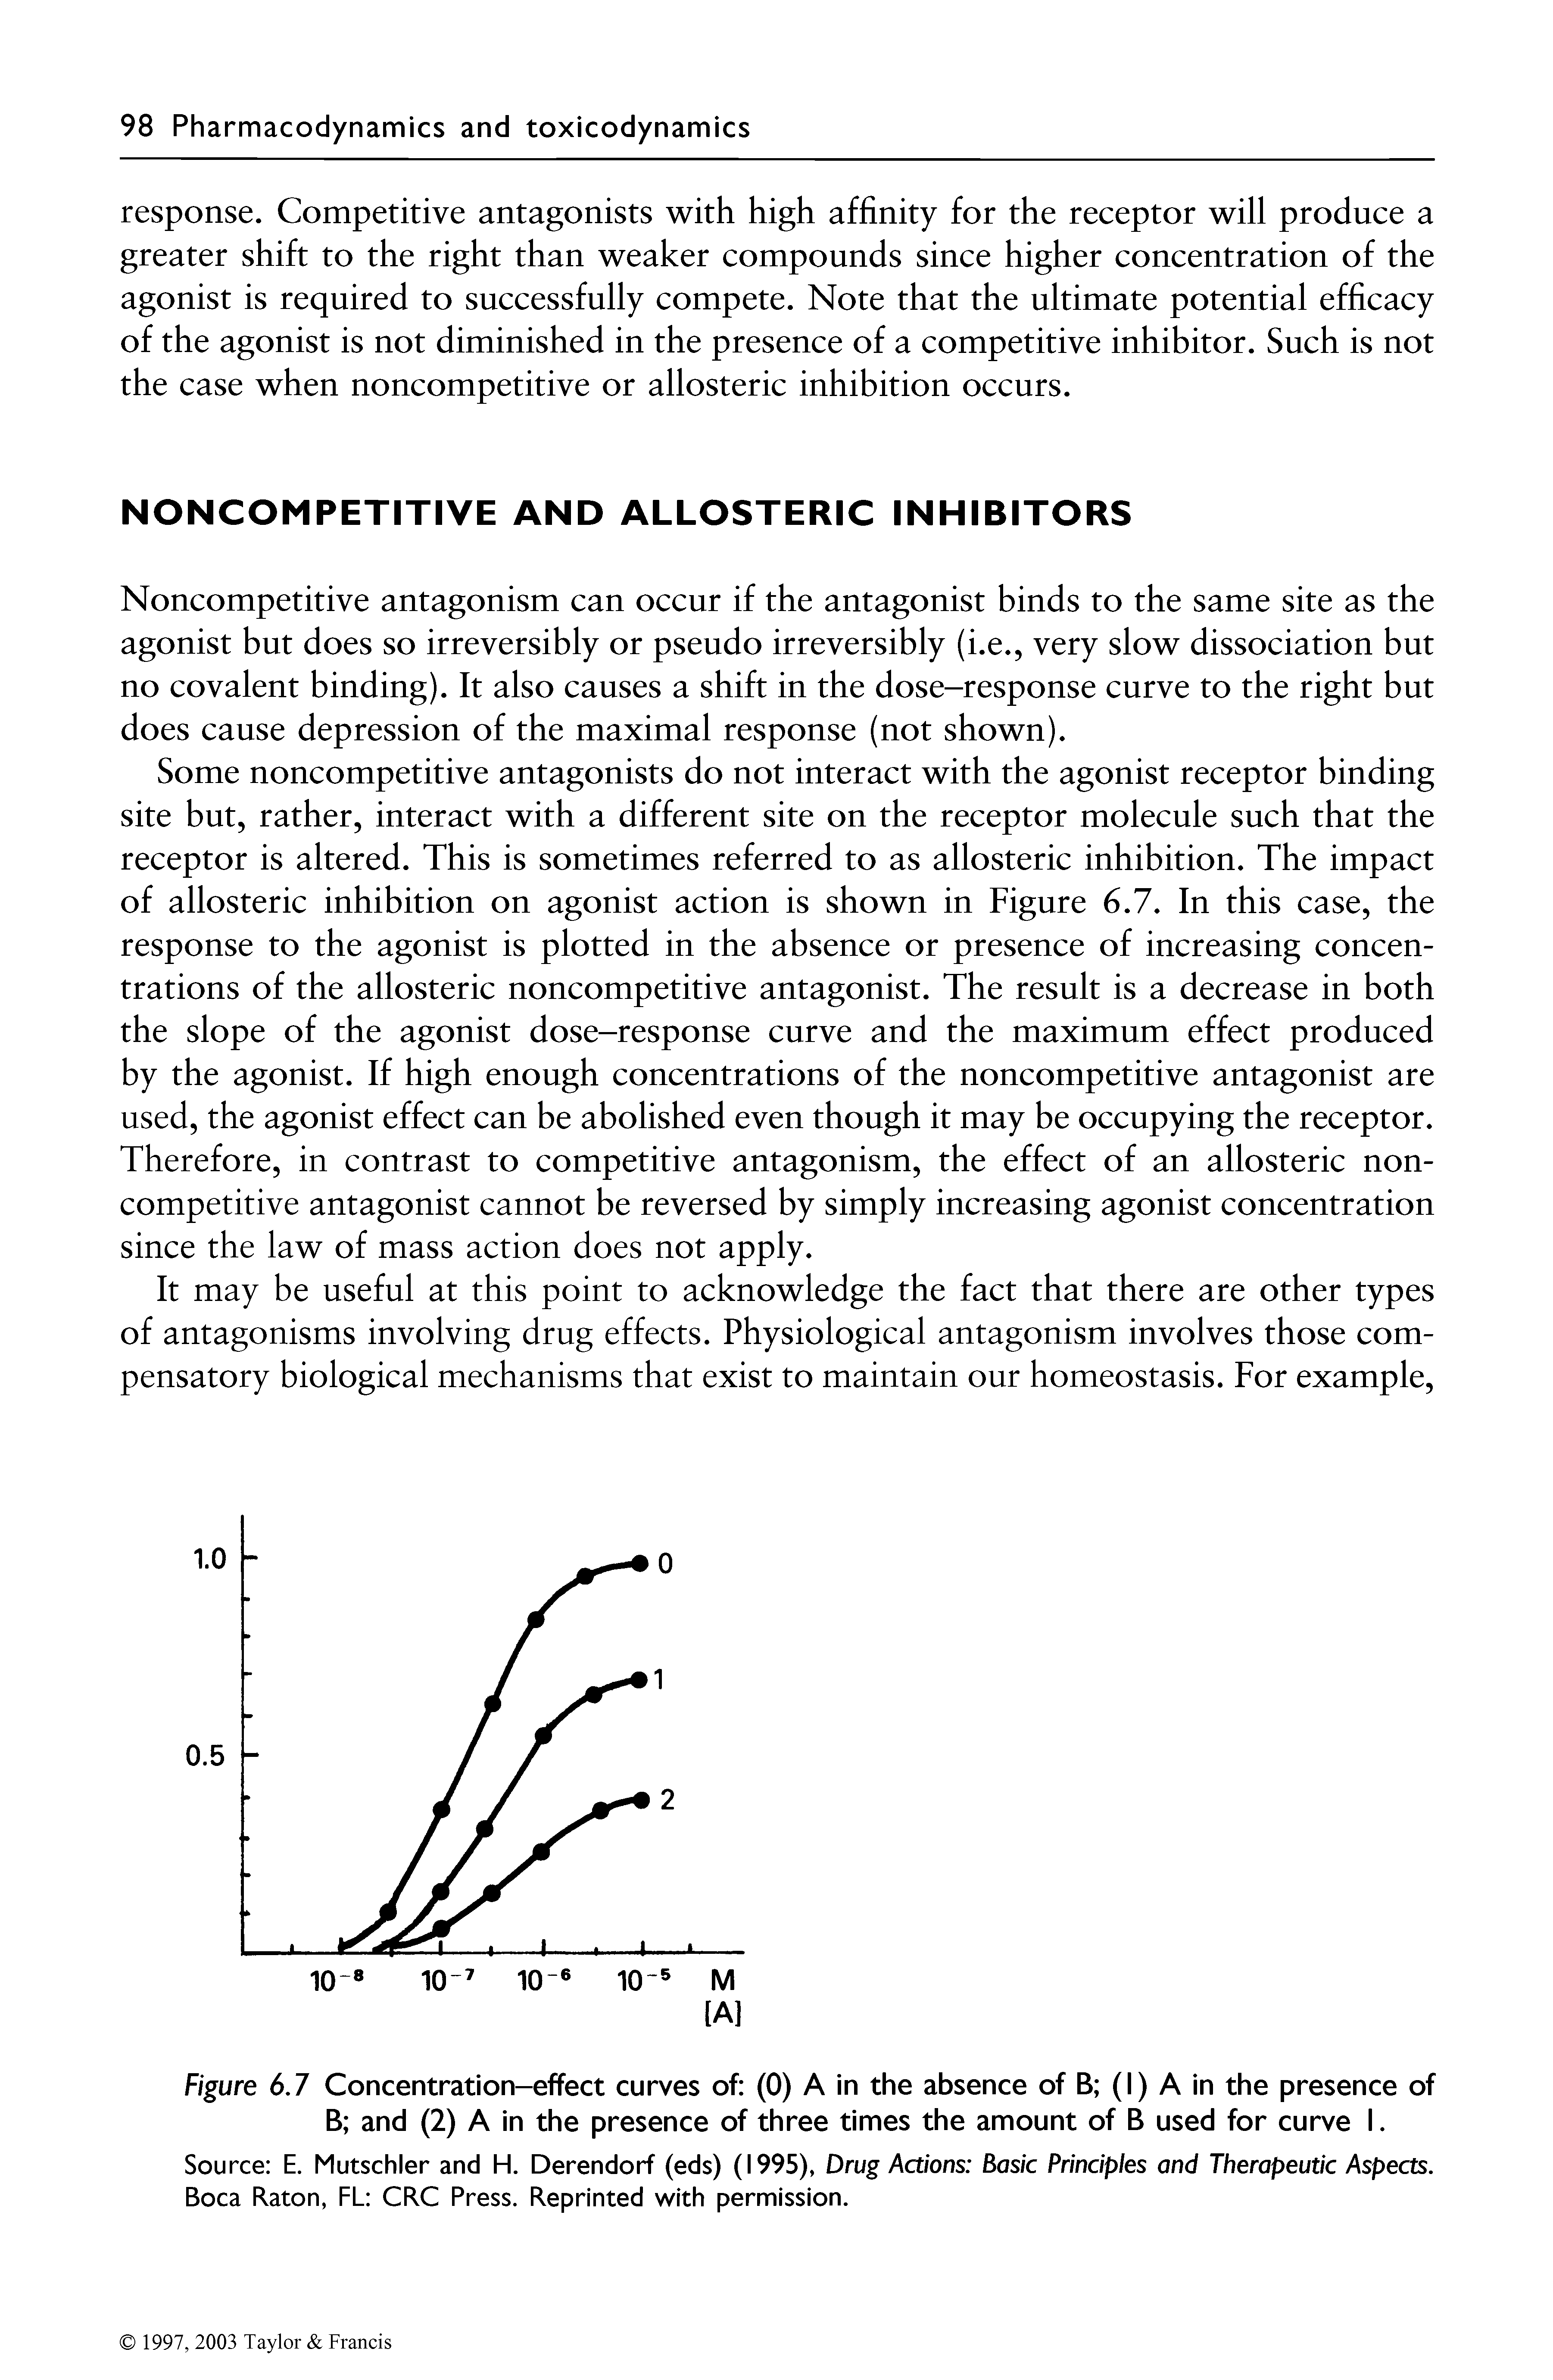 Figure 6.7 Concentration-effect curves of (0) A in the absence of B (I) A in the presence of B and (2) A in the presence of three times the amount of B used for curve I.